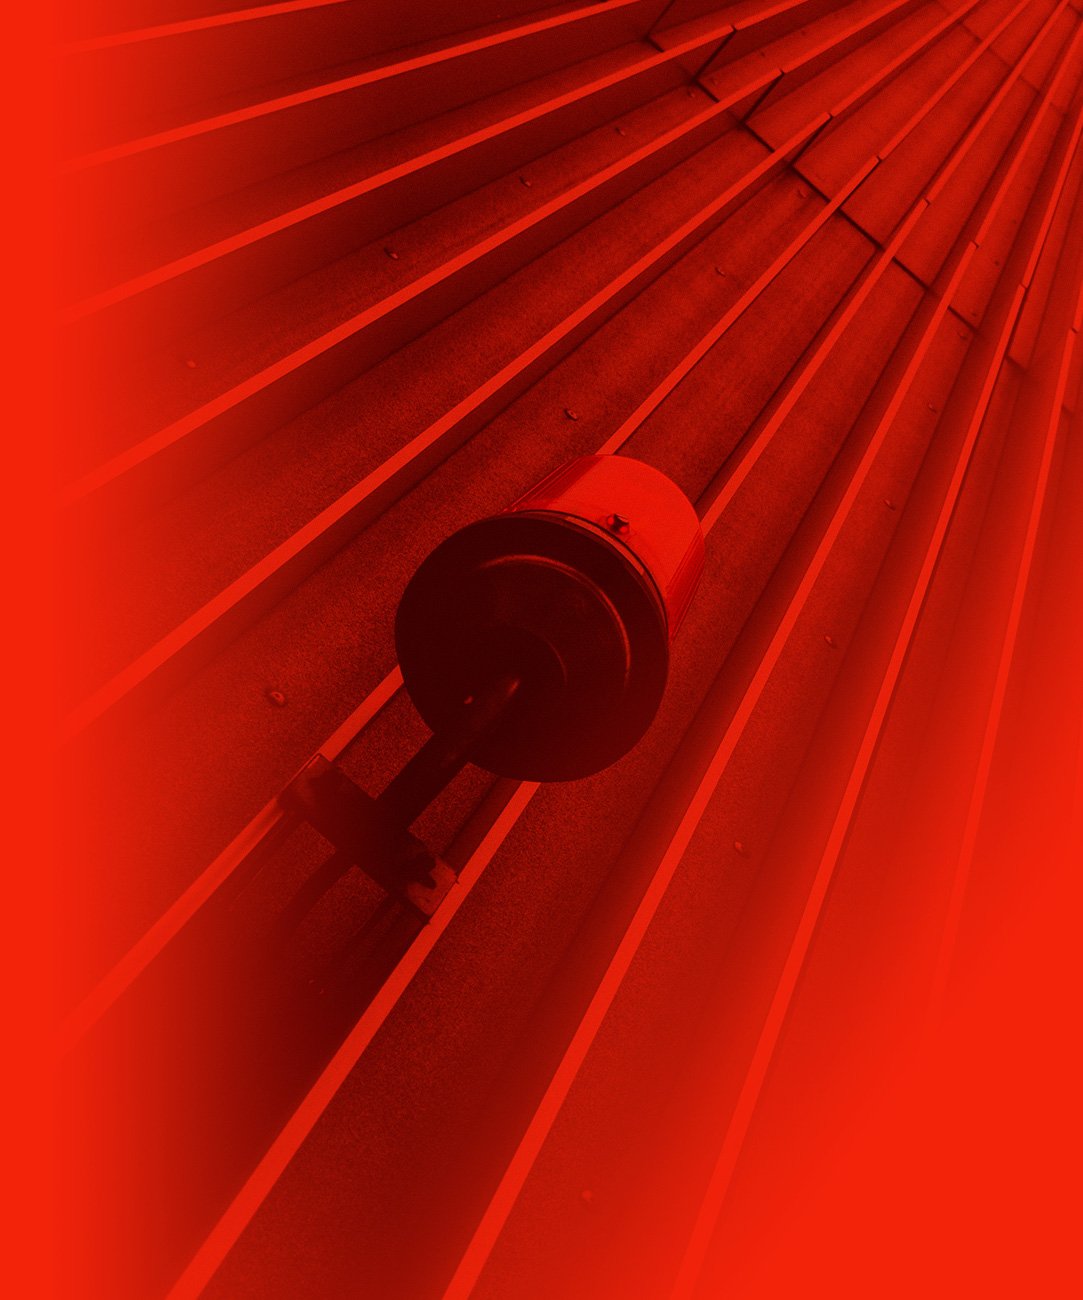 Emergency alarm light hanging off wall in red filter